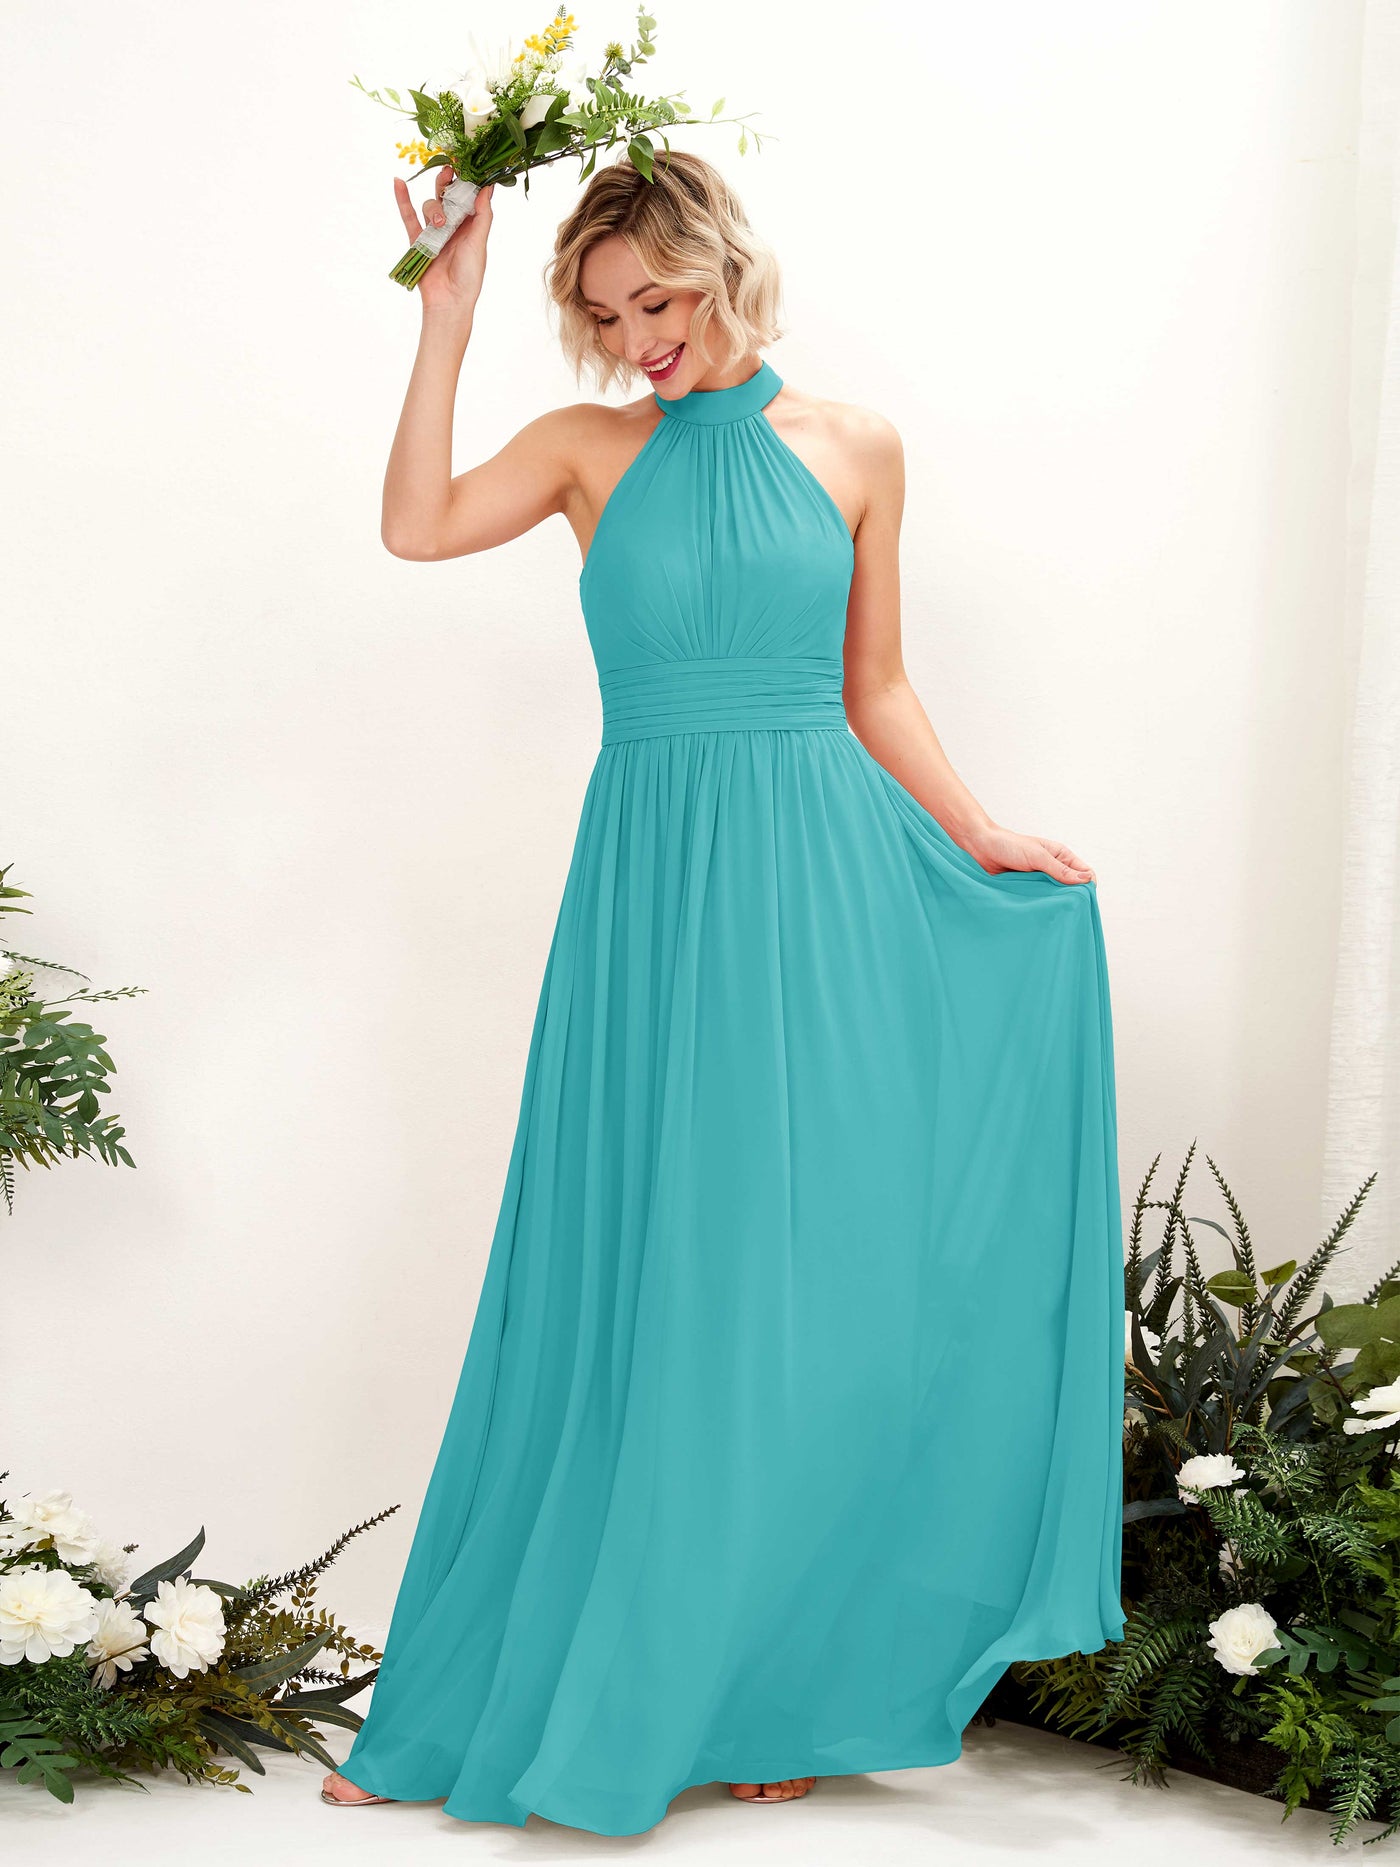 Turquoise Bridesmaid Dresses Bridesmaid Dress A-line Chiffon Halter Full Length Sleeveless Wedding Party Dress (81225323)#color_turquoise